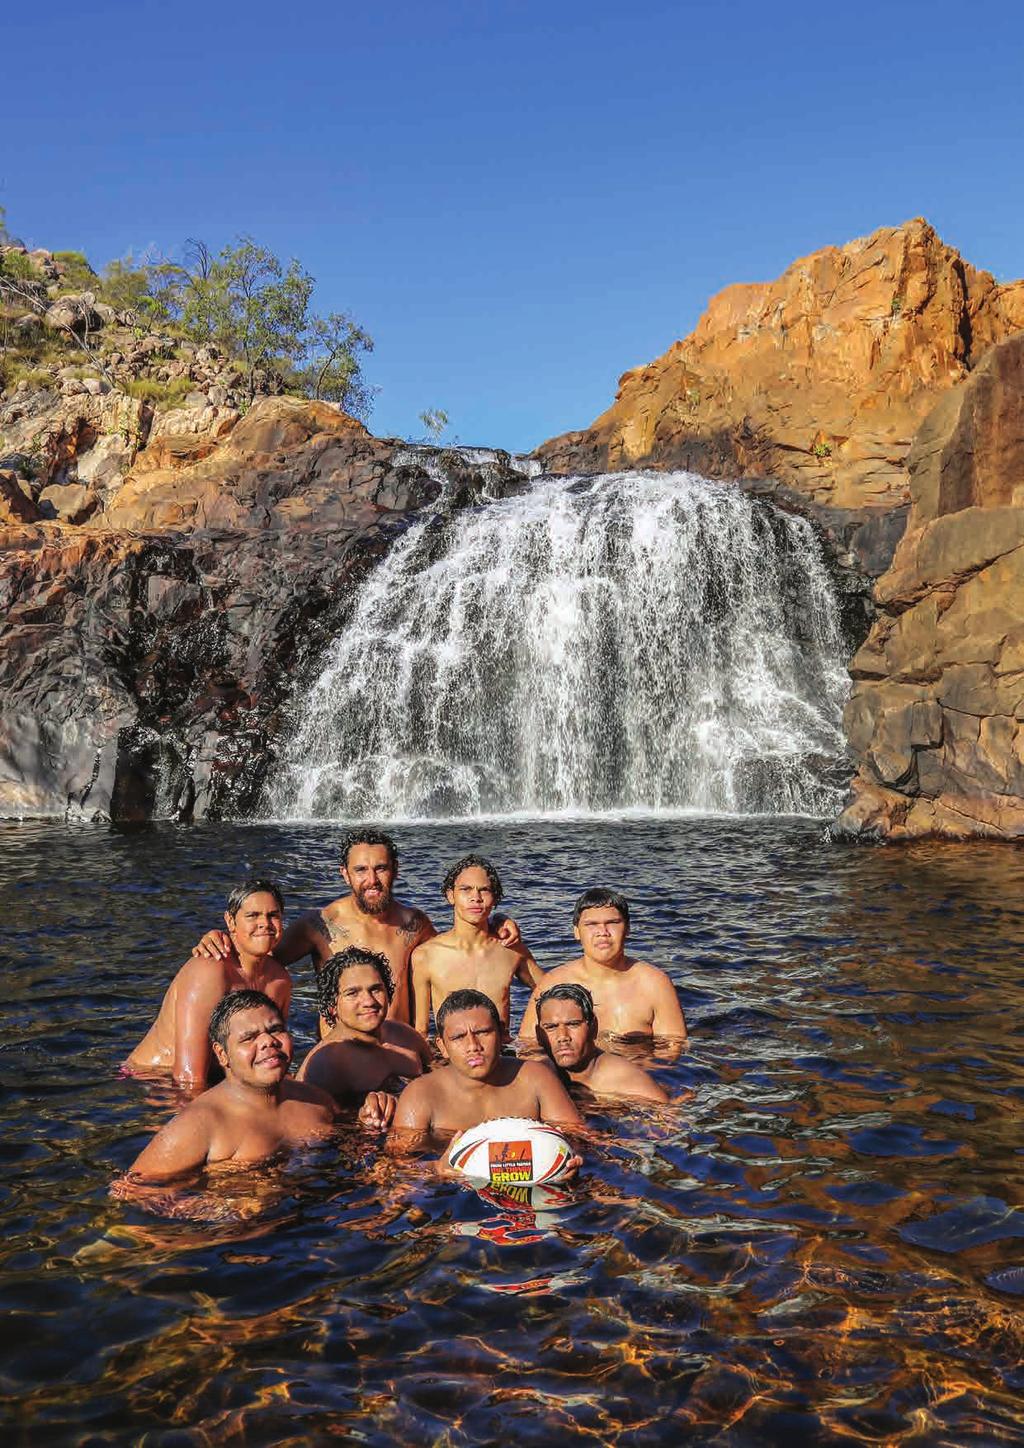 Year 10 boys from Katherine Academy (NT) enjoy a dip at Edith Falls during the